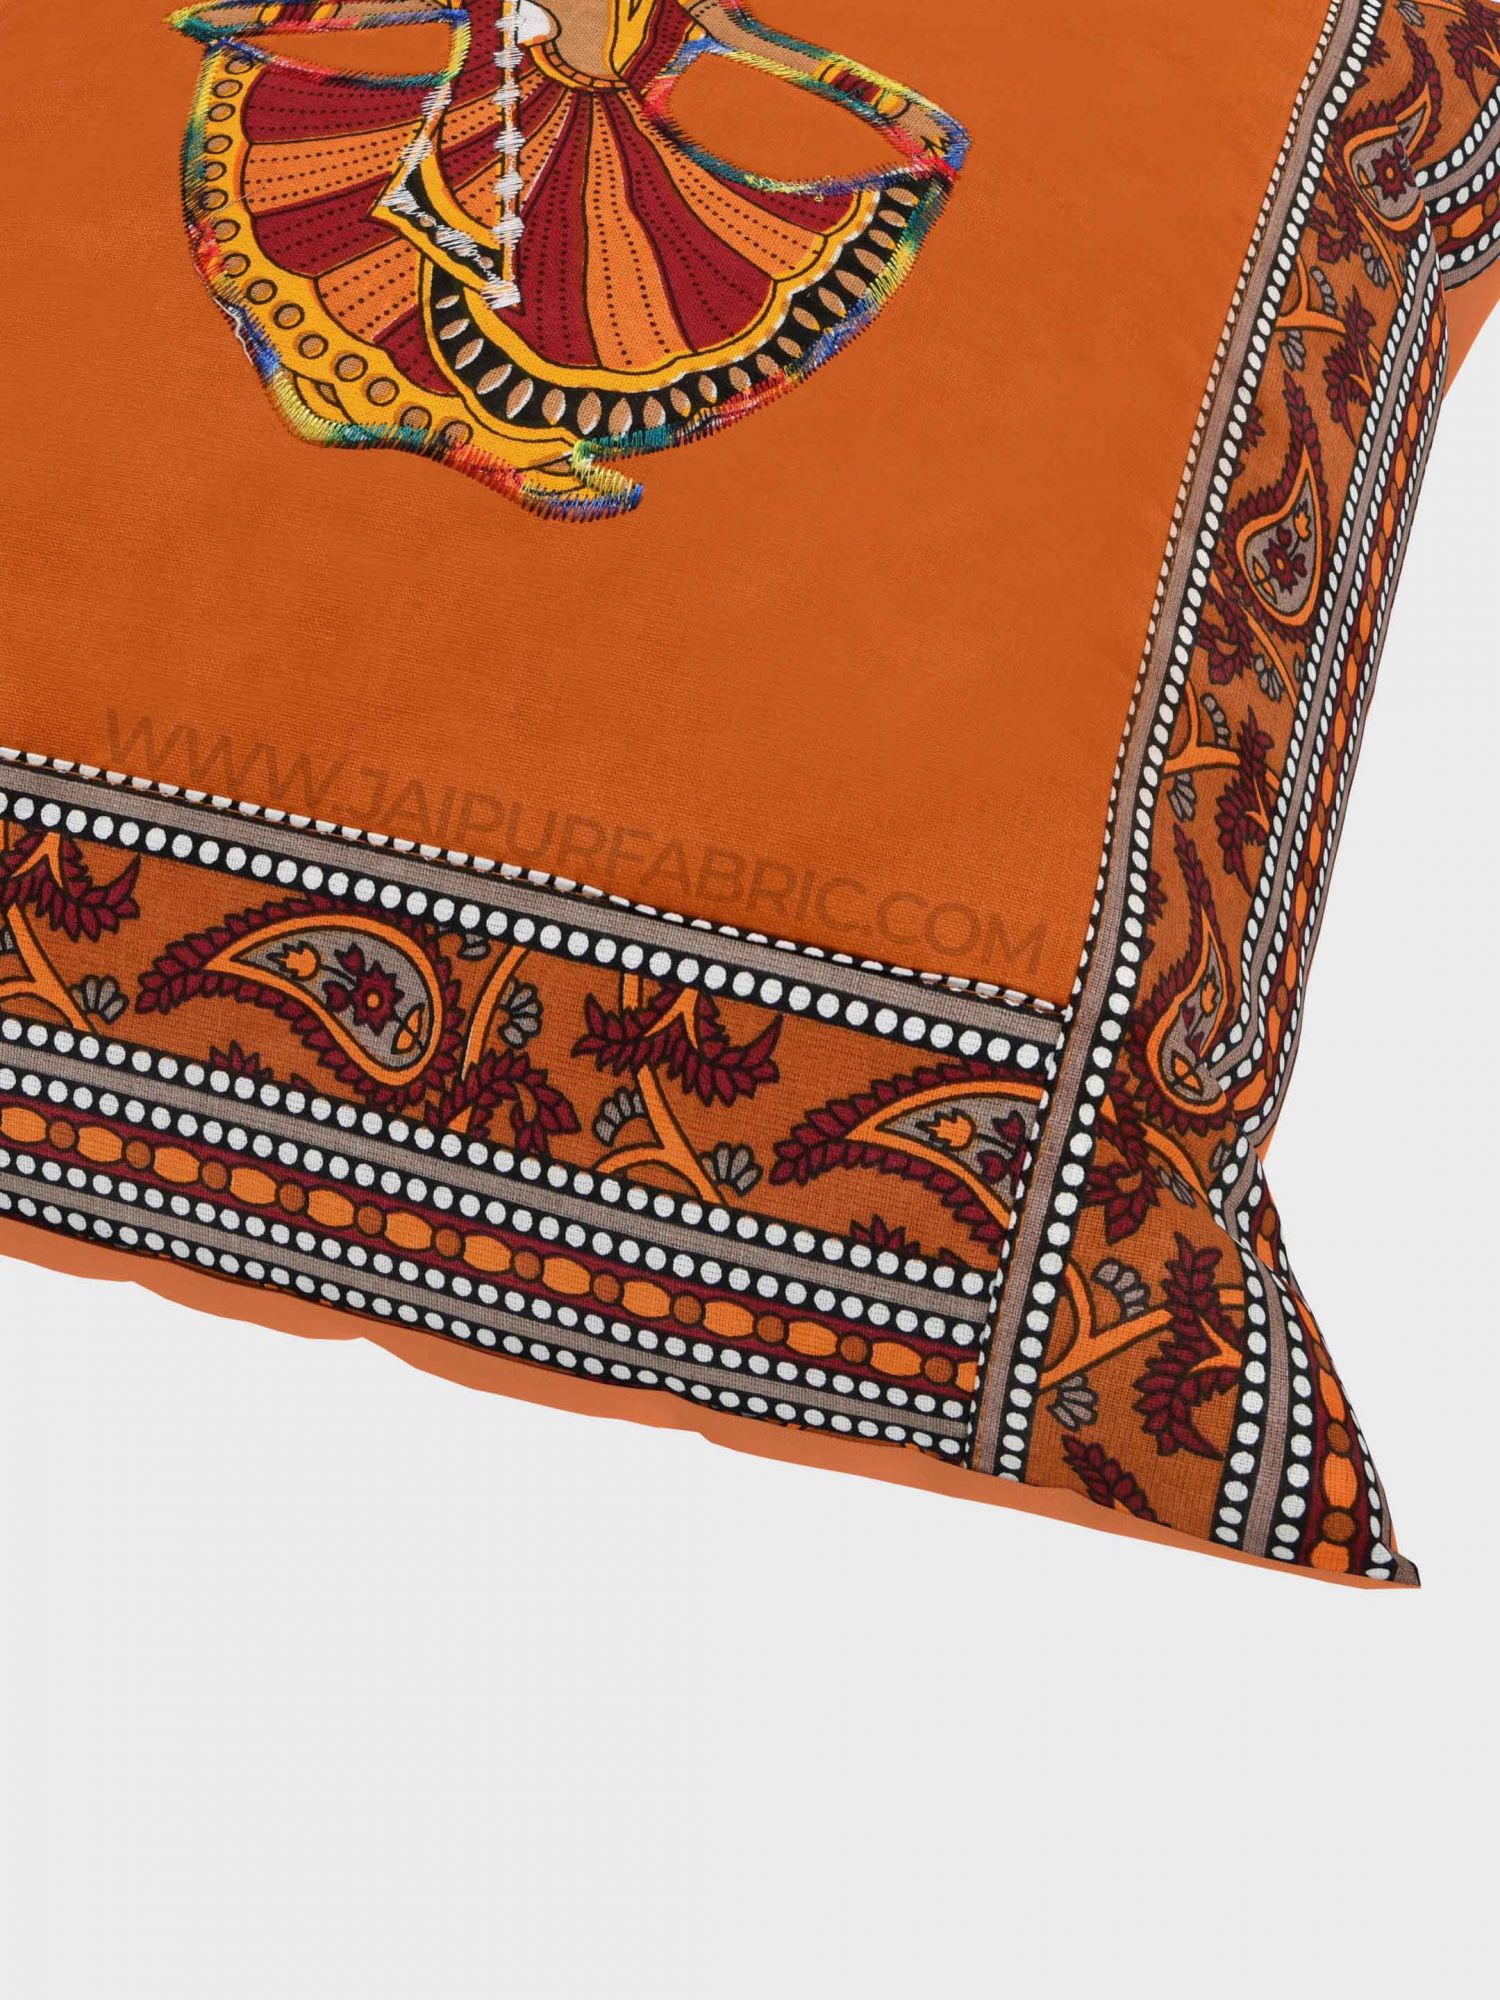 Applique Mustard Gujri Jaipuri Hand Made Embroidery Patch Work Cushion Cover